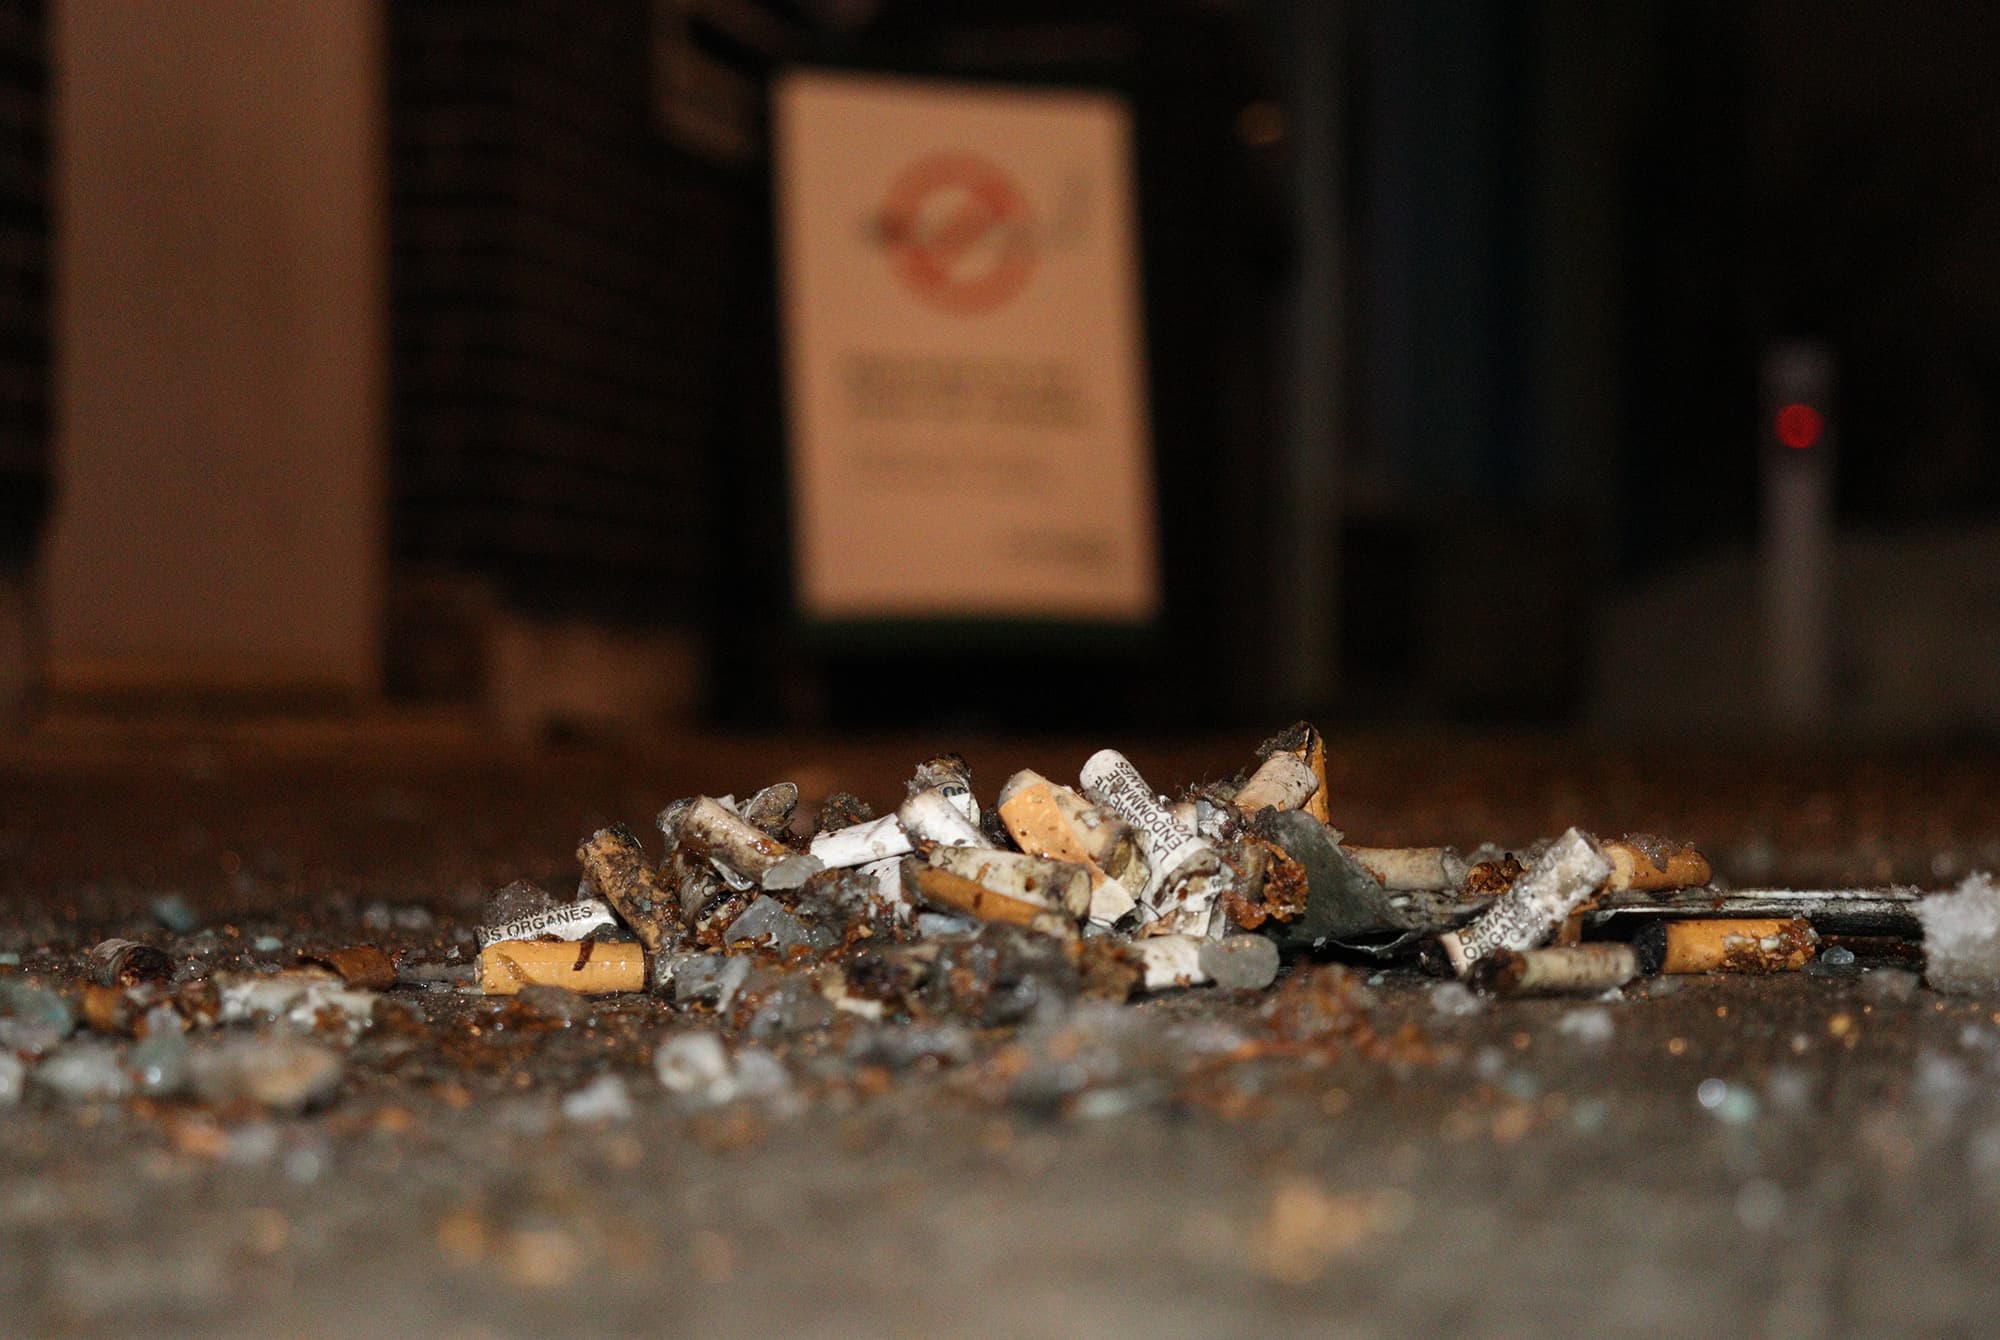 A small pile of cigarette butts was scattered in front of a 